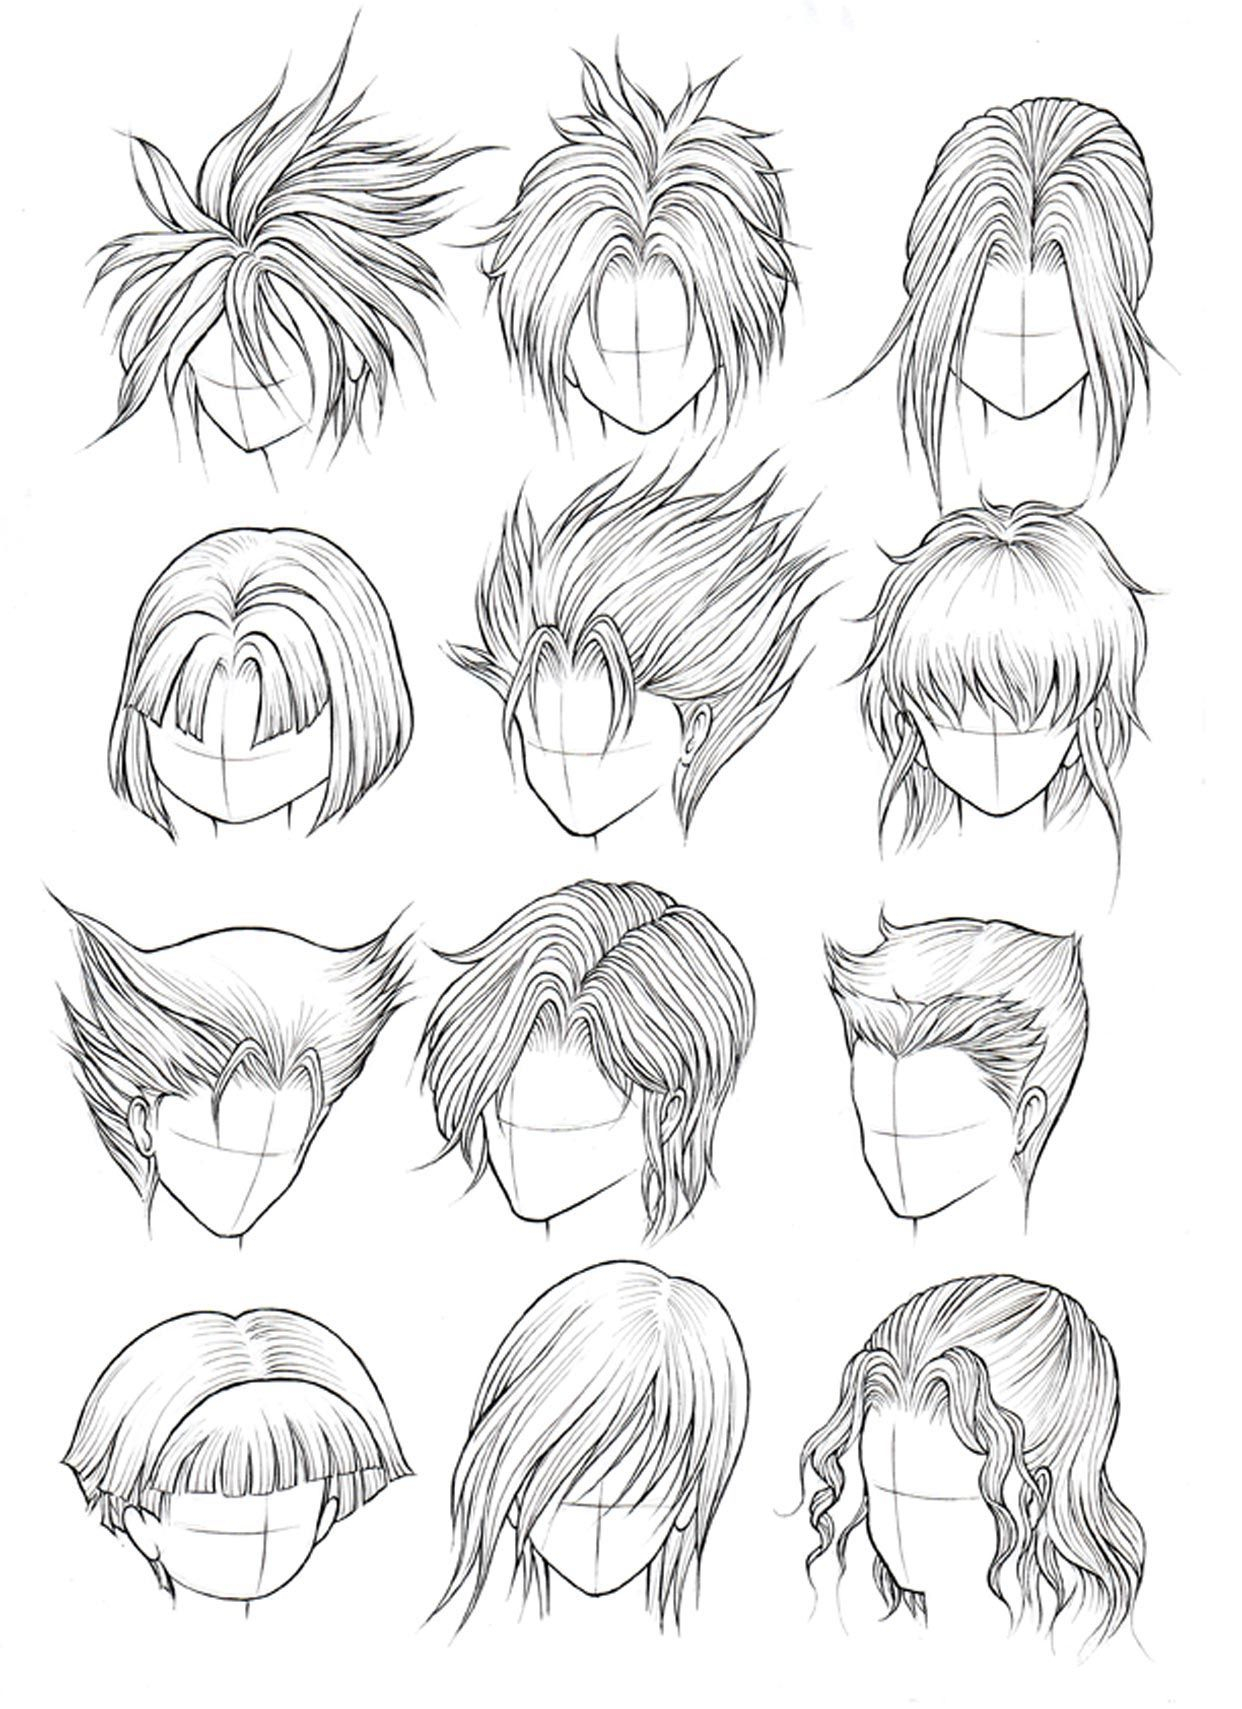  How To Draw Hair Anime  The ultimate guide 